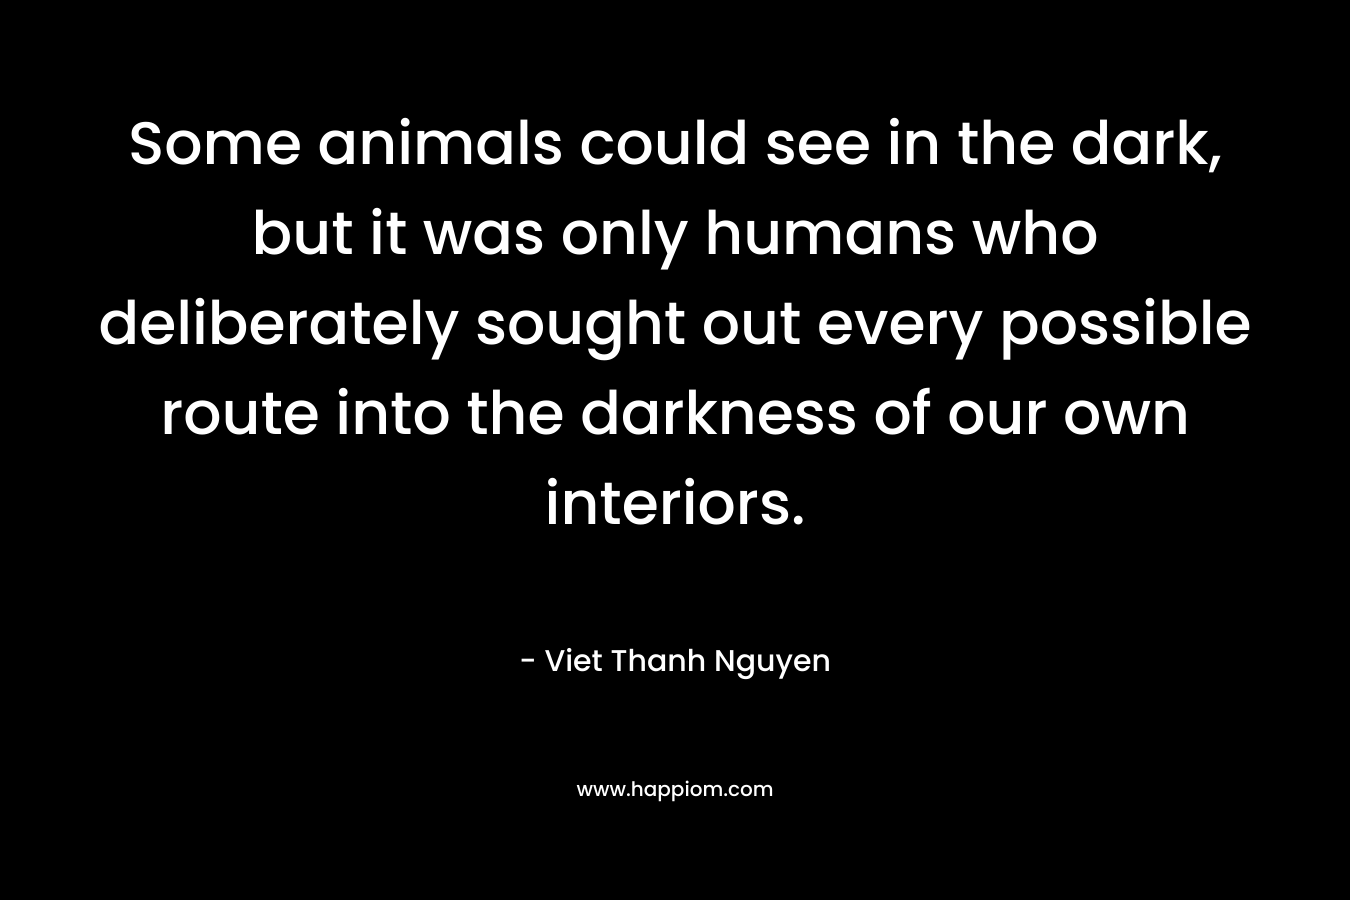 Some animals could see in the dark, but it was only humans who deliberately sought out every possible route into the darkness of our own interiors.